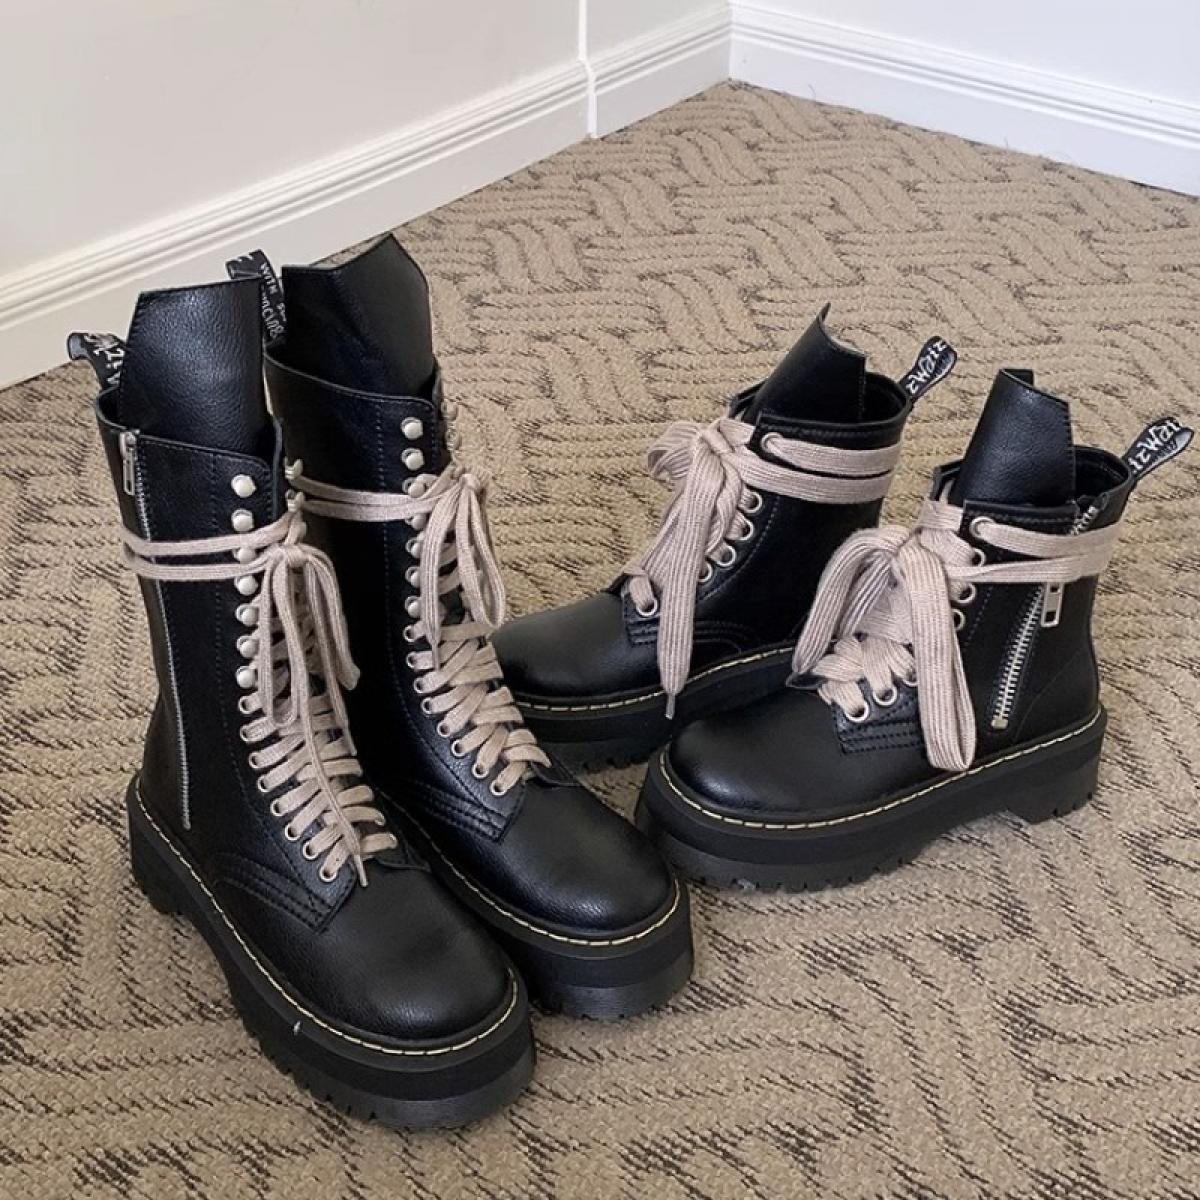 Women Motorcycle Leather Chunky Platform Boots Luxury Mid Calf Lace Up Bandage Winter Riding Boots Casual Zip Black Ankl